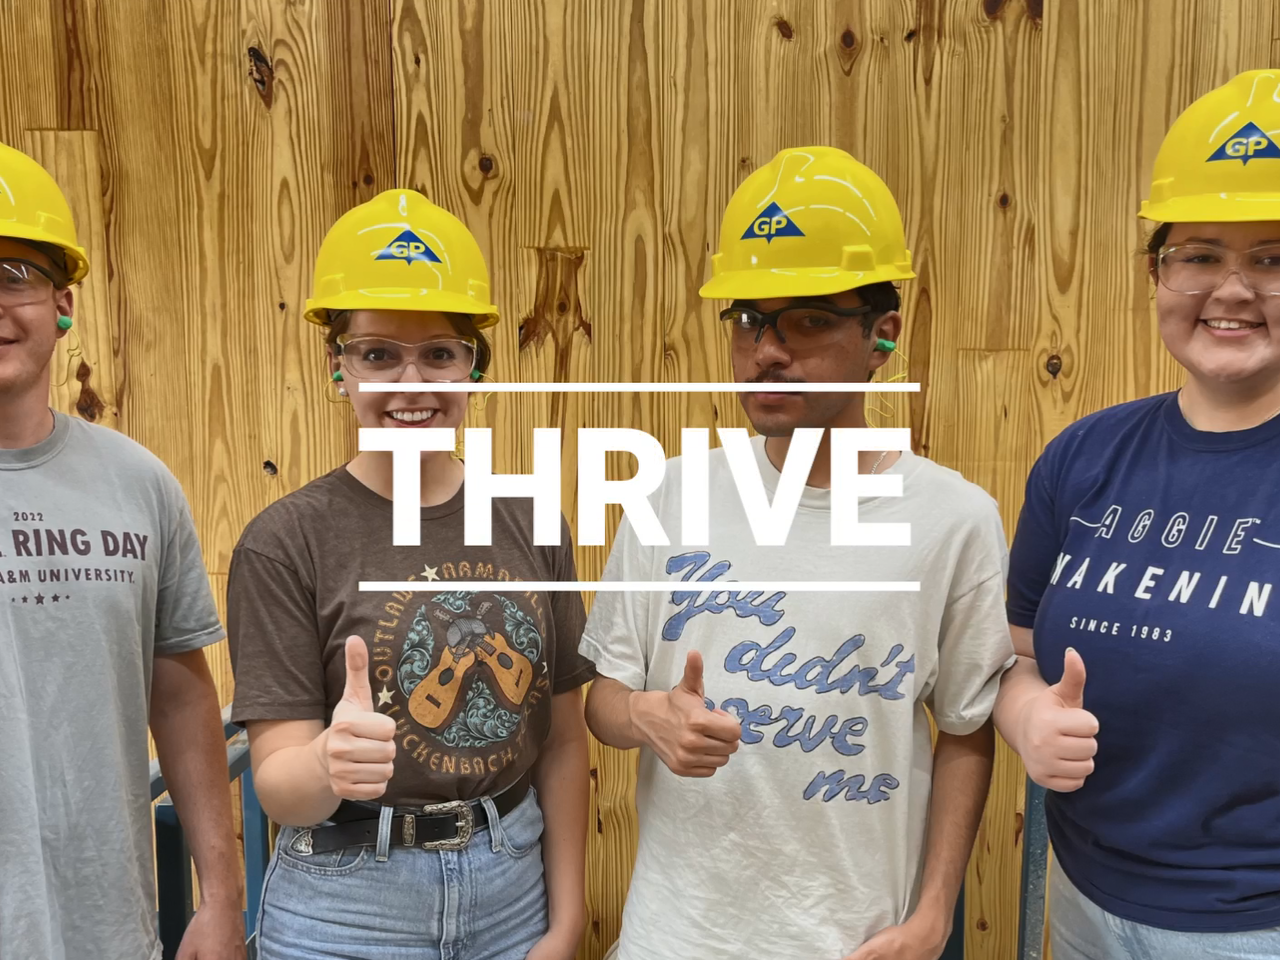 Four people giving thumbs-up, wearing matching yellow hard hats. "Thrive" on top of the image.